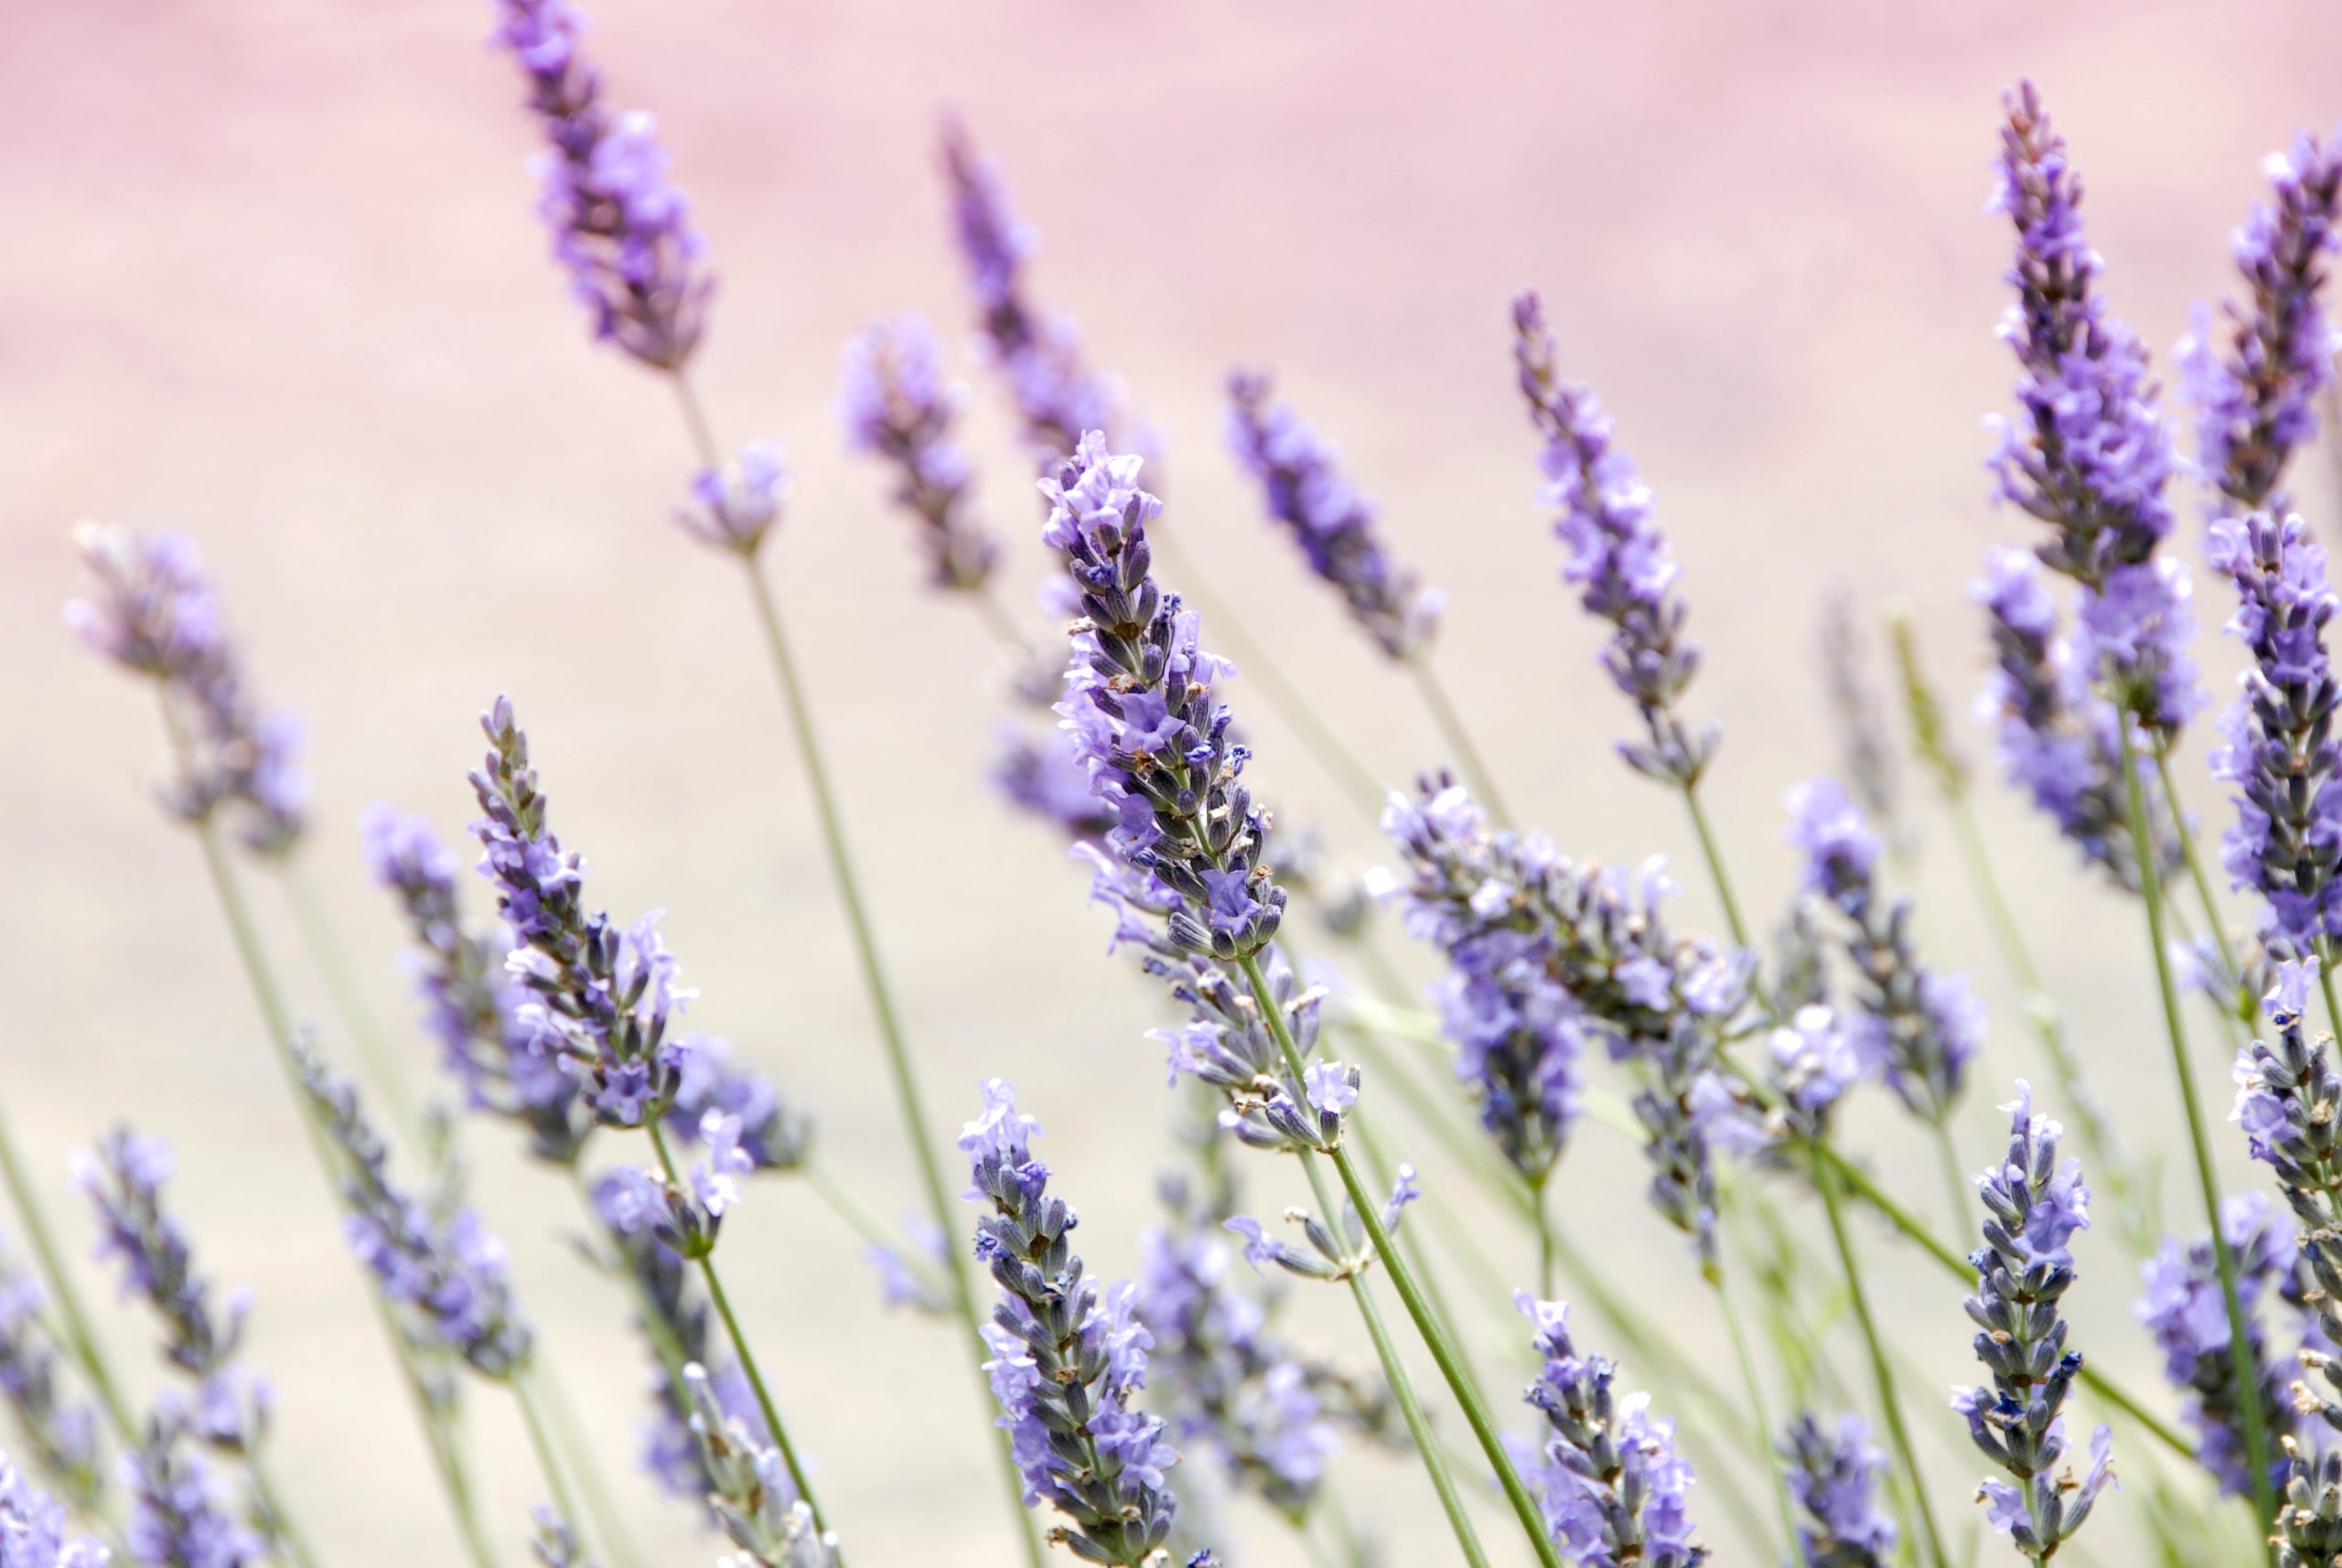 Lavender and its incredible healing benefits